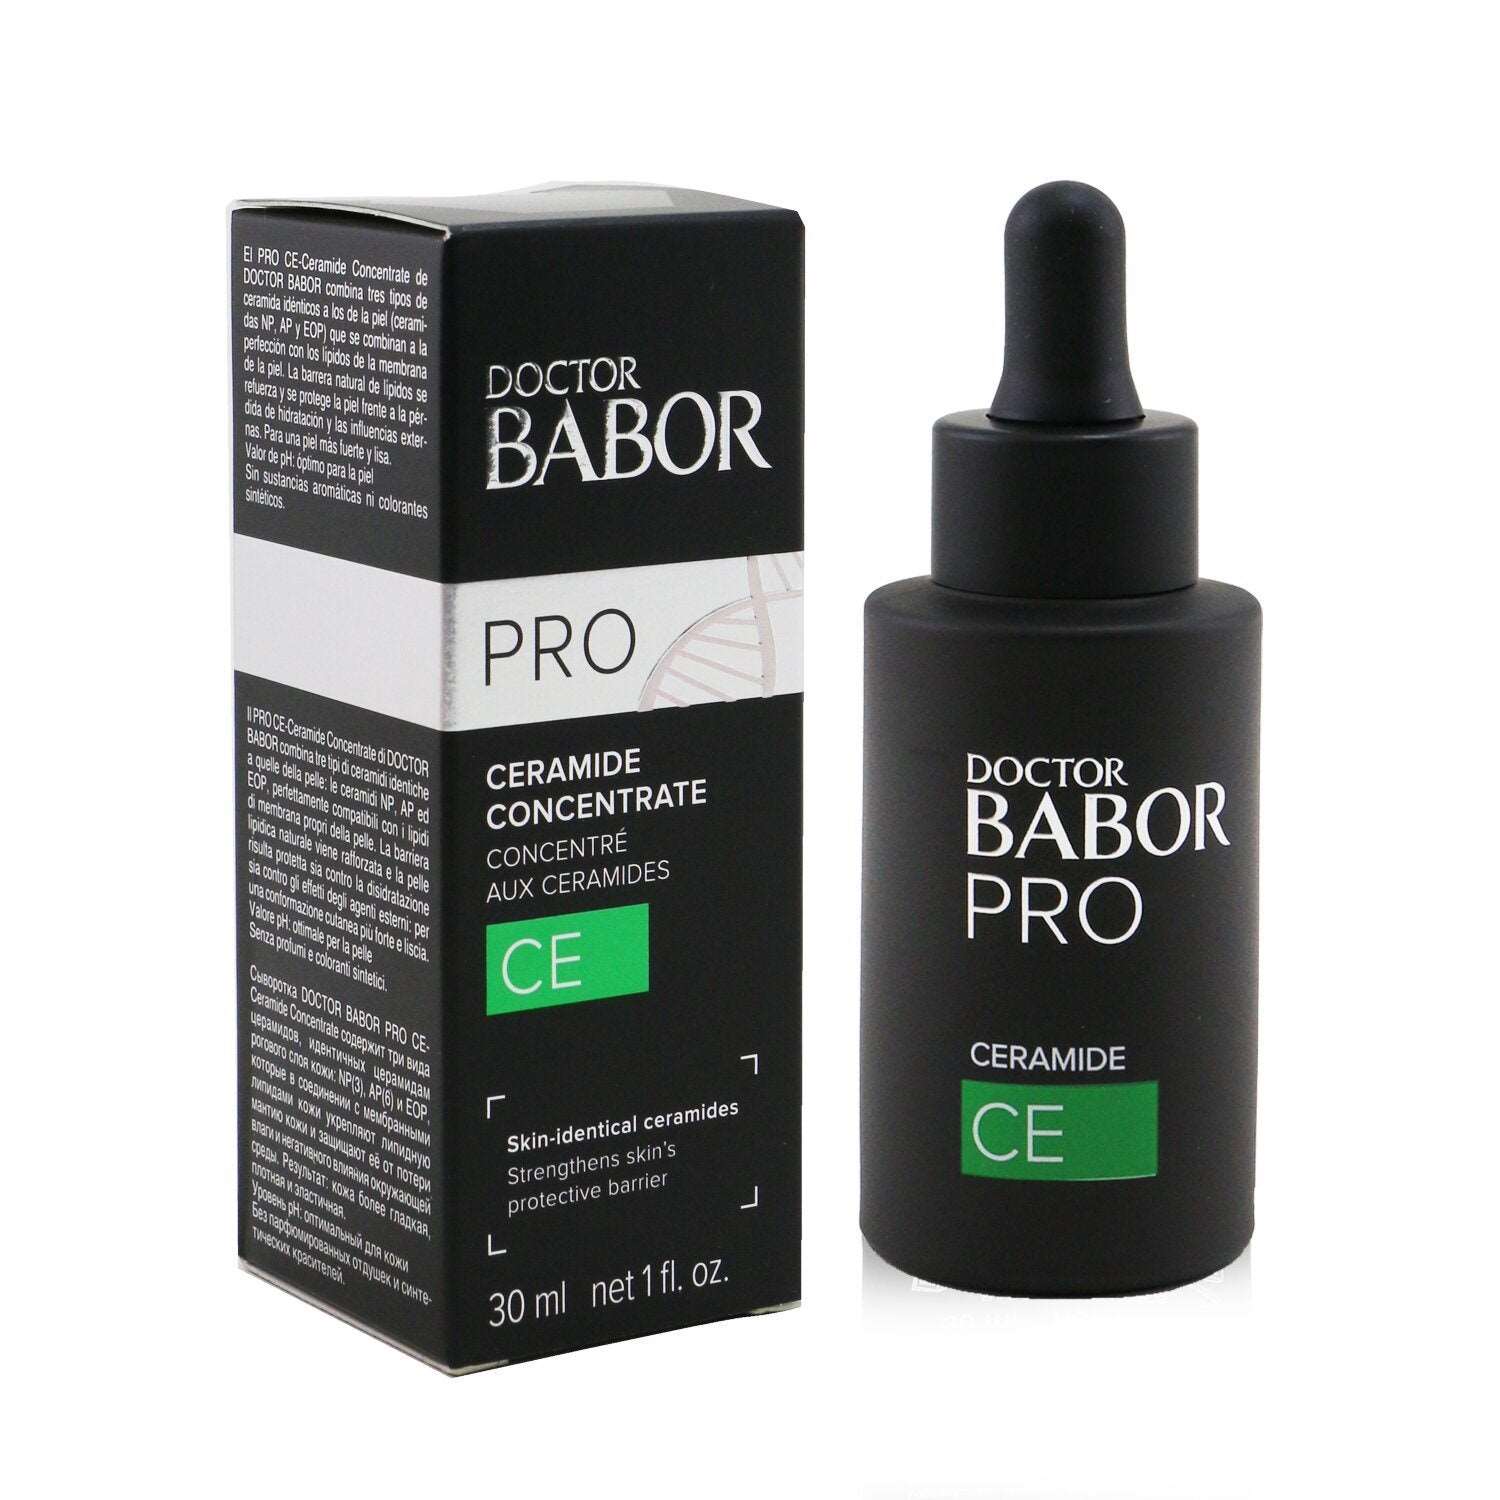 BABOR - Doctor Babor Pro CE Ceramide Concentrate - 30ml/1oz 3P's Inclusive Beauty